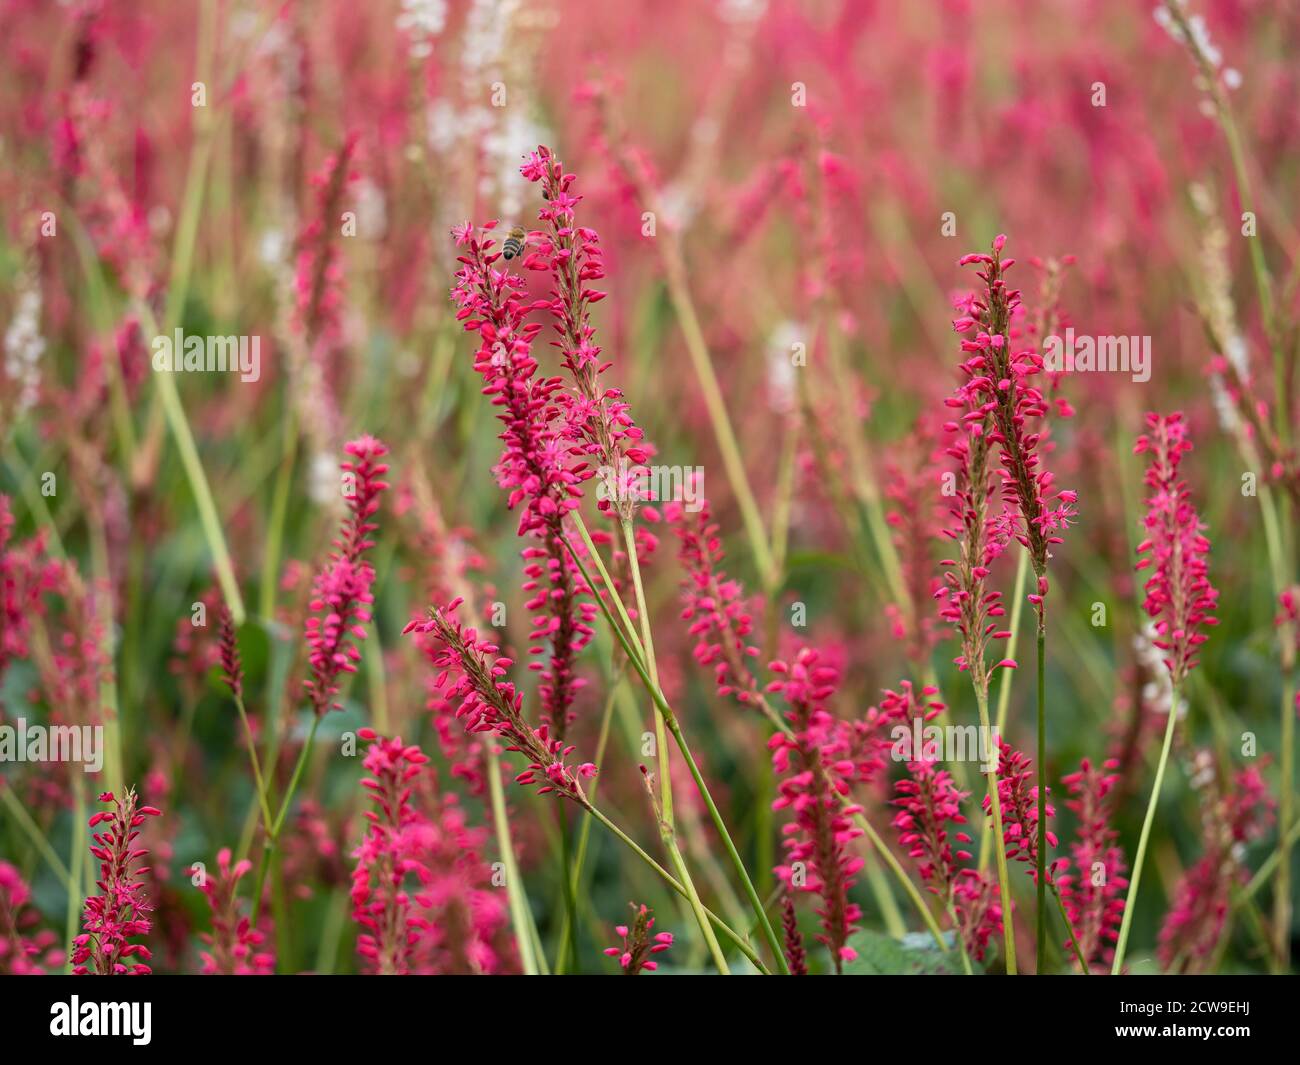 Pretty flower spikes of Persicaria amplexicaulis in a garden with soft focus Stock Photo